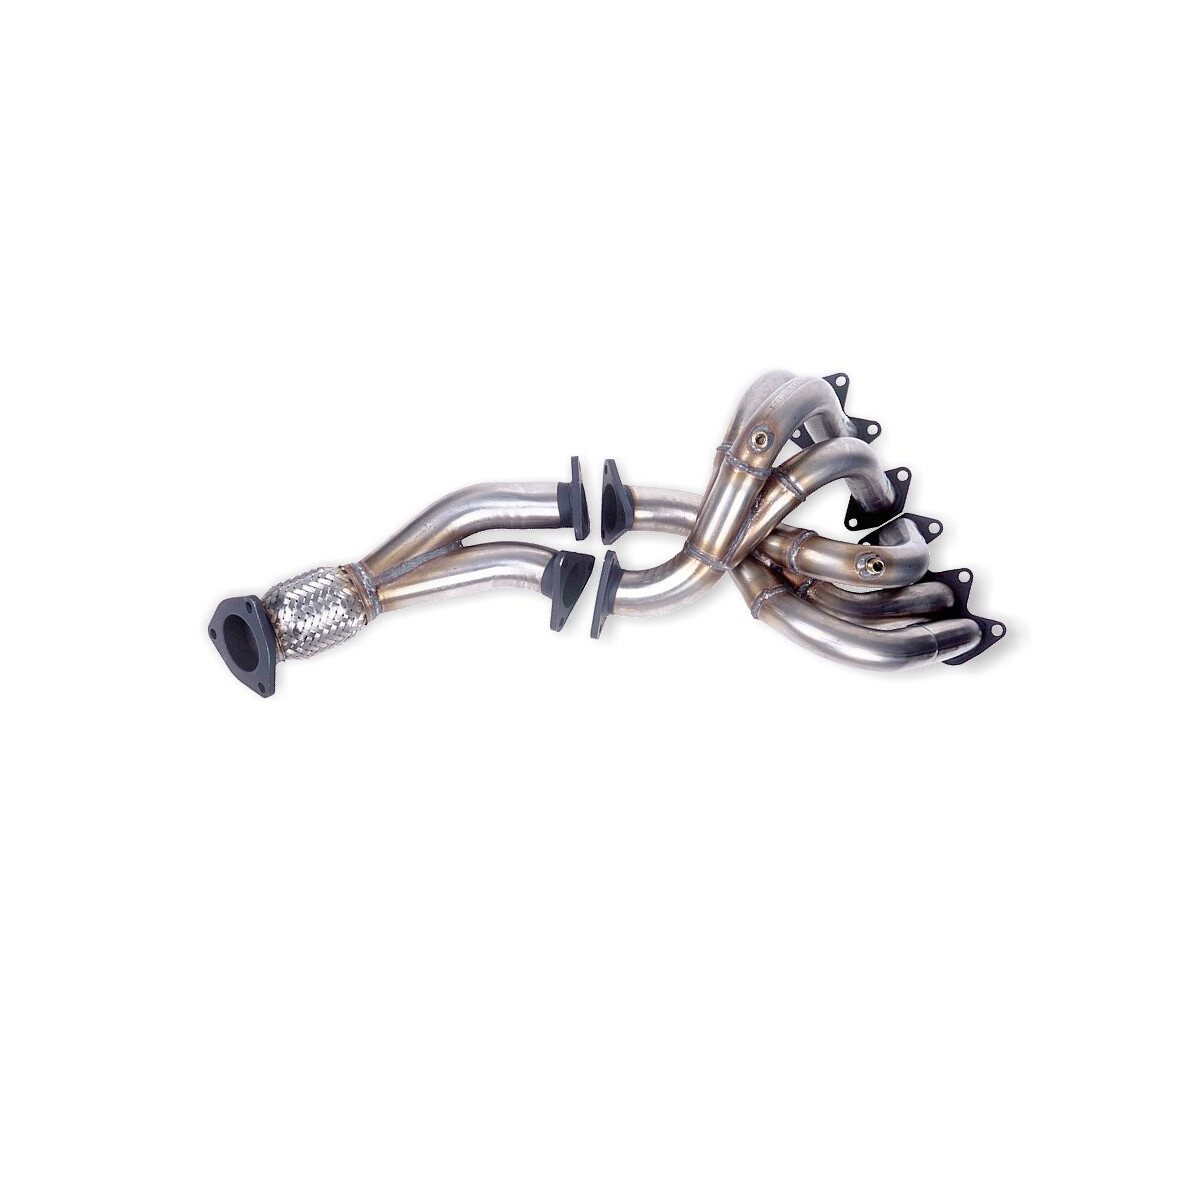 TeZet stainless steel exhaust header for 19 (1988-1992 /...